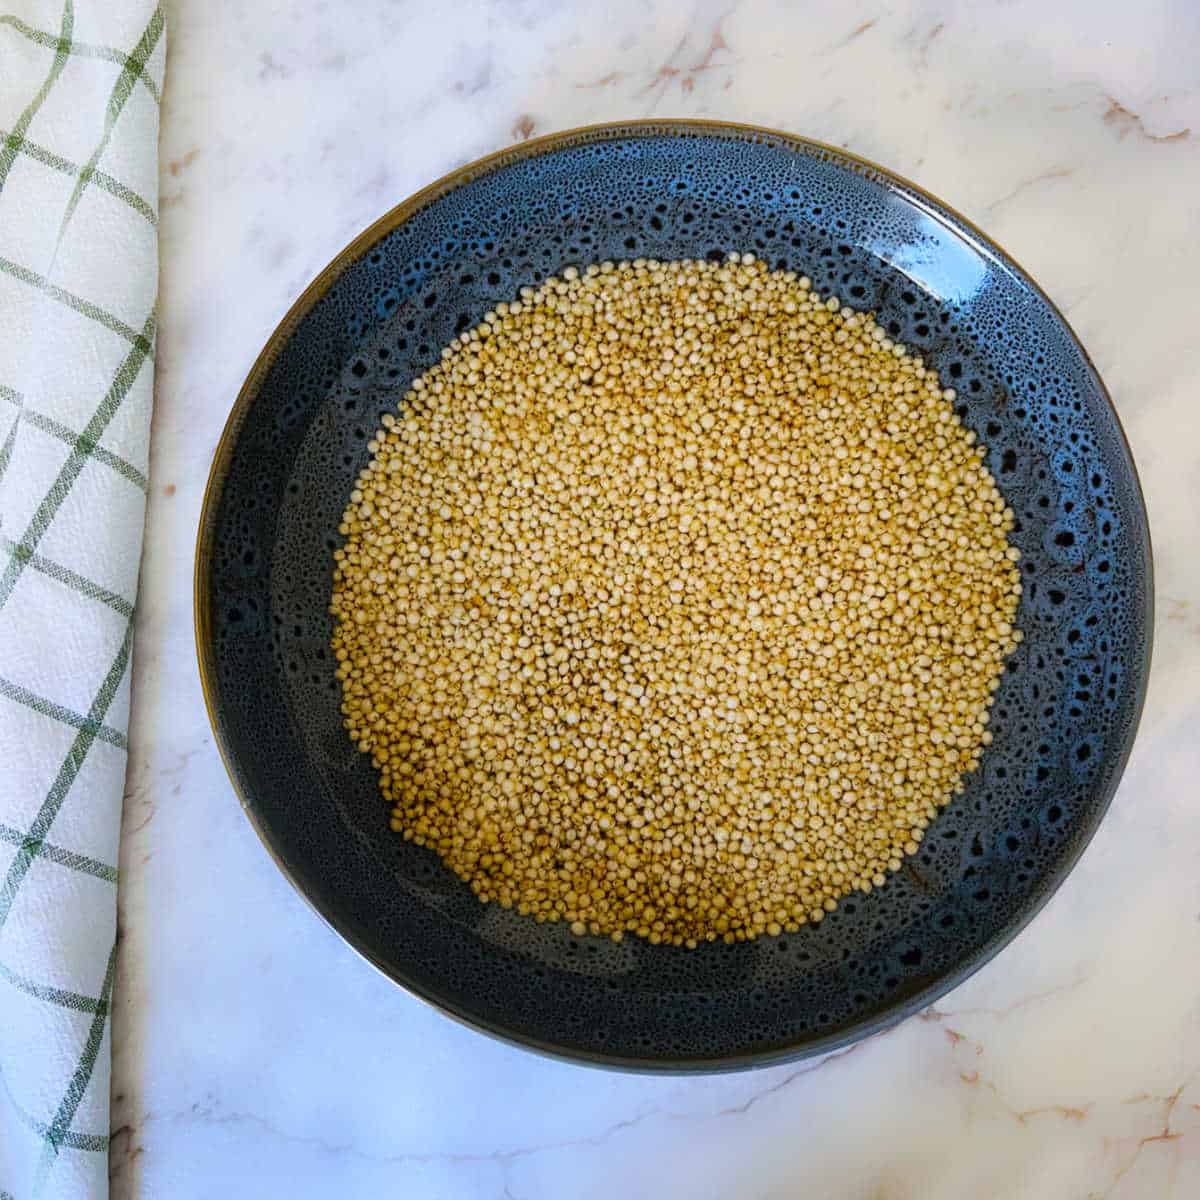 Soaked sorghum placed in a grey bowl.